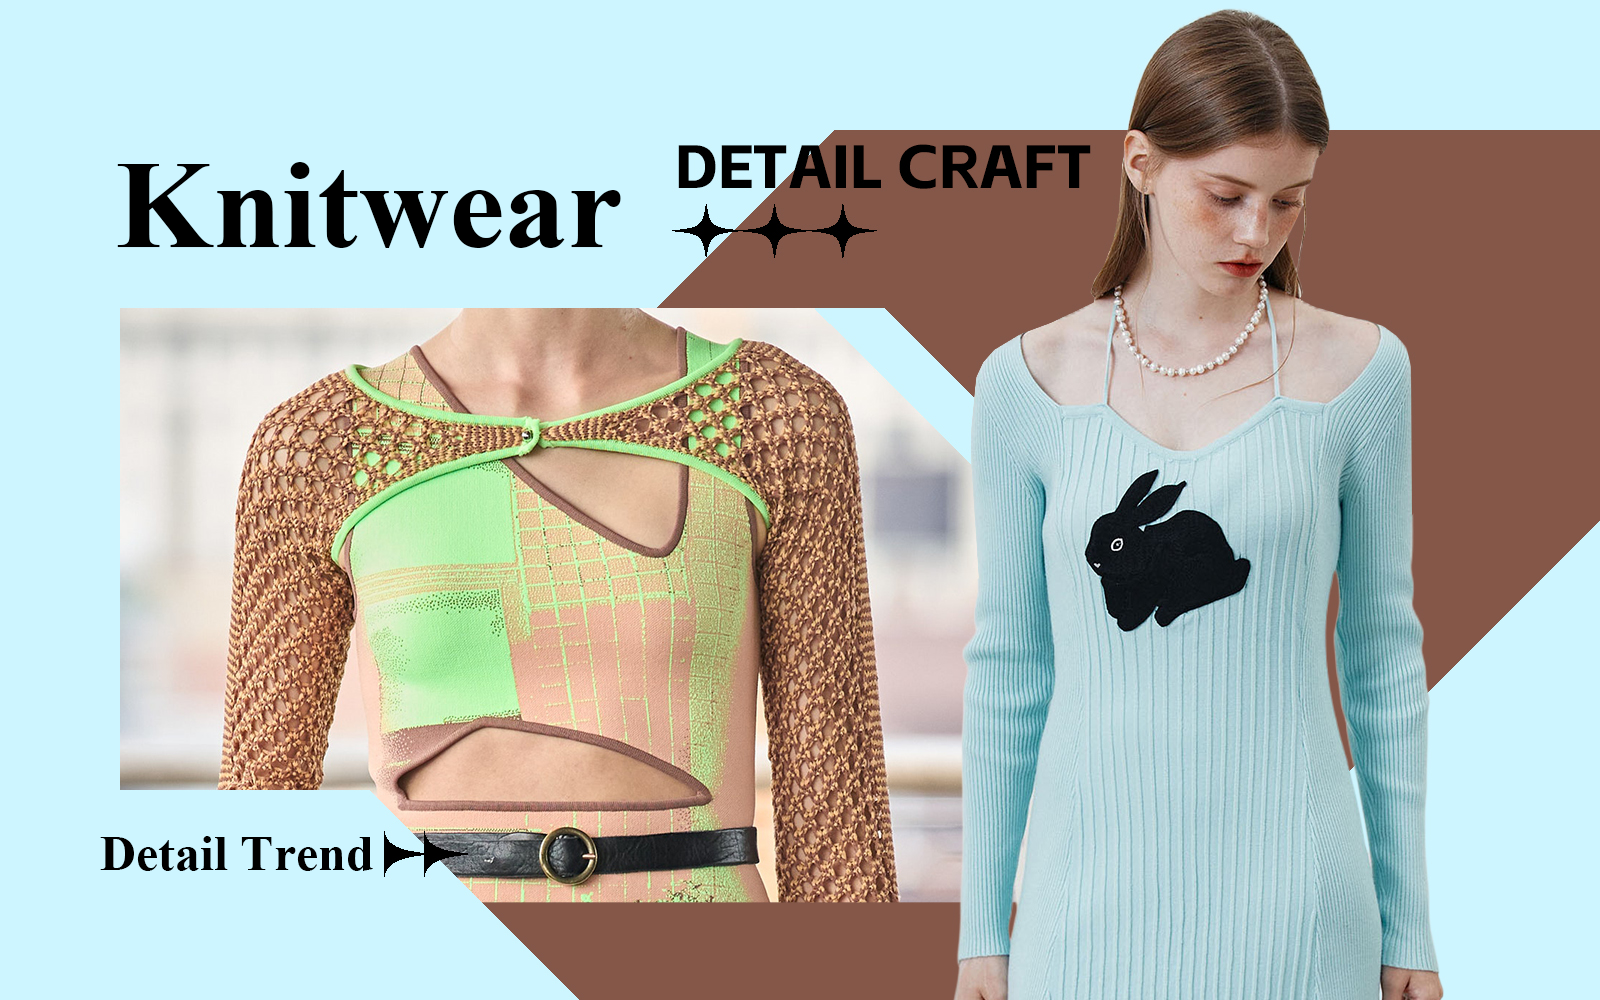 Eye-catching Detail -- S/S 2025 Detail & Craft Trend for Knitwear